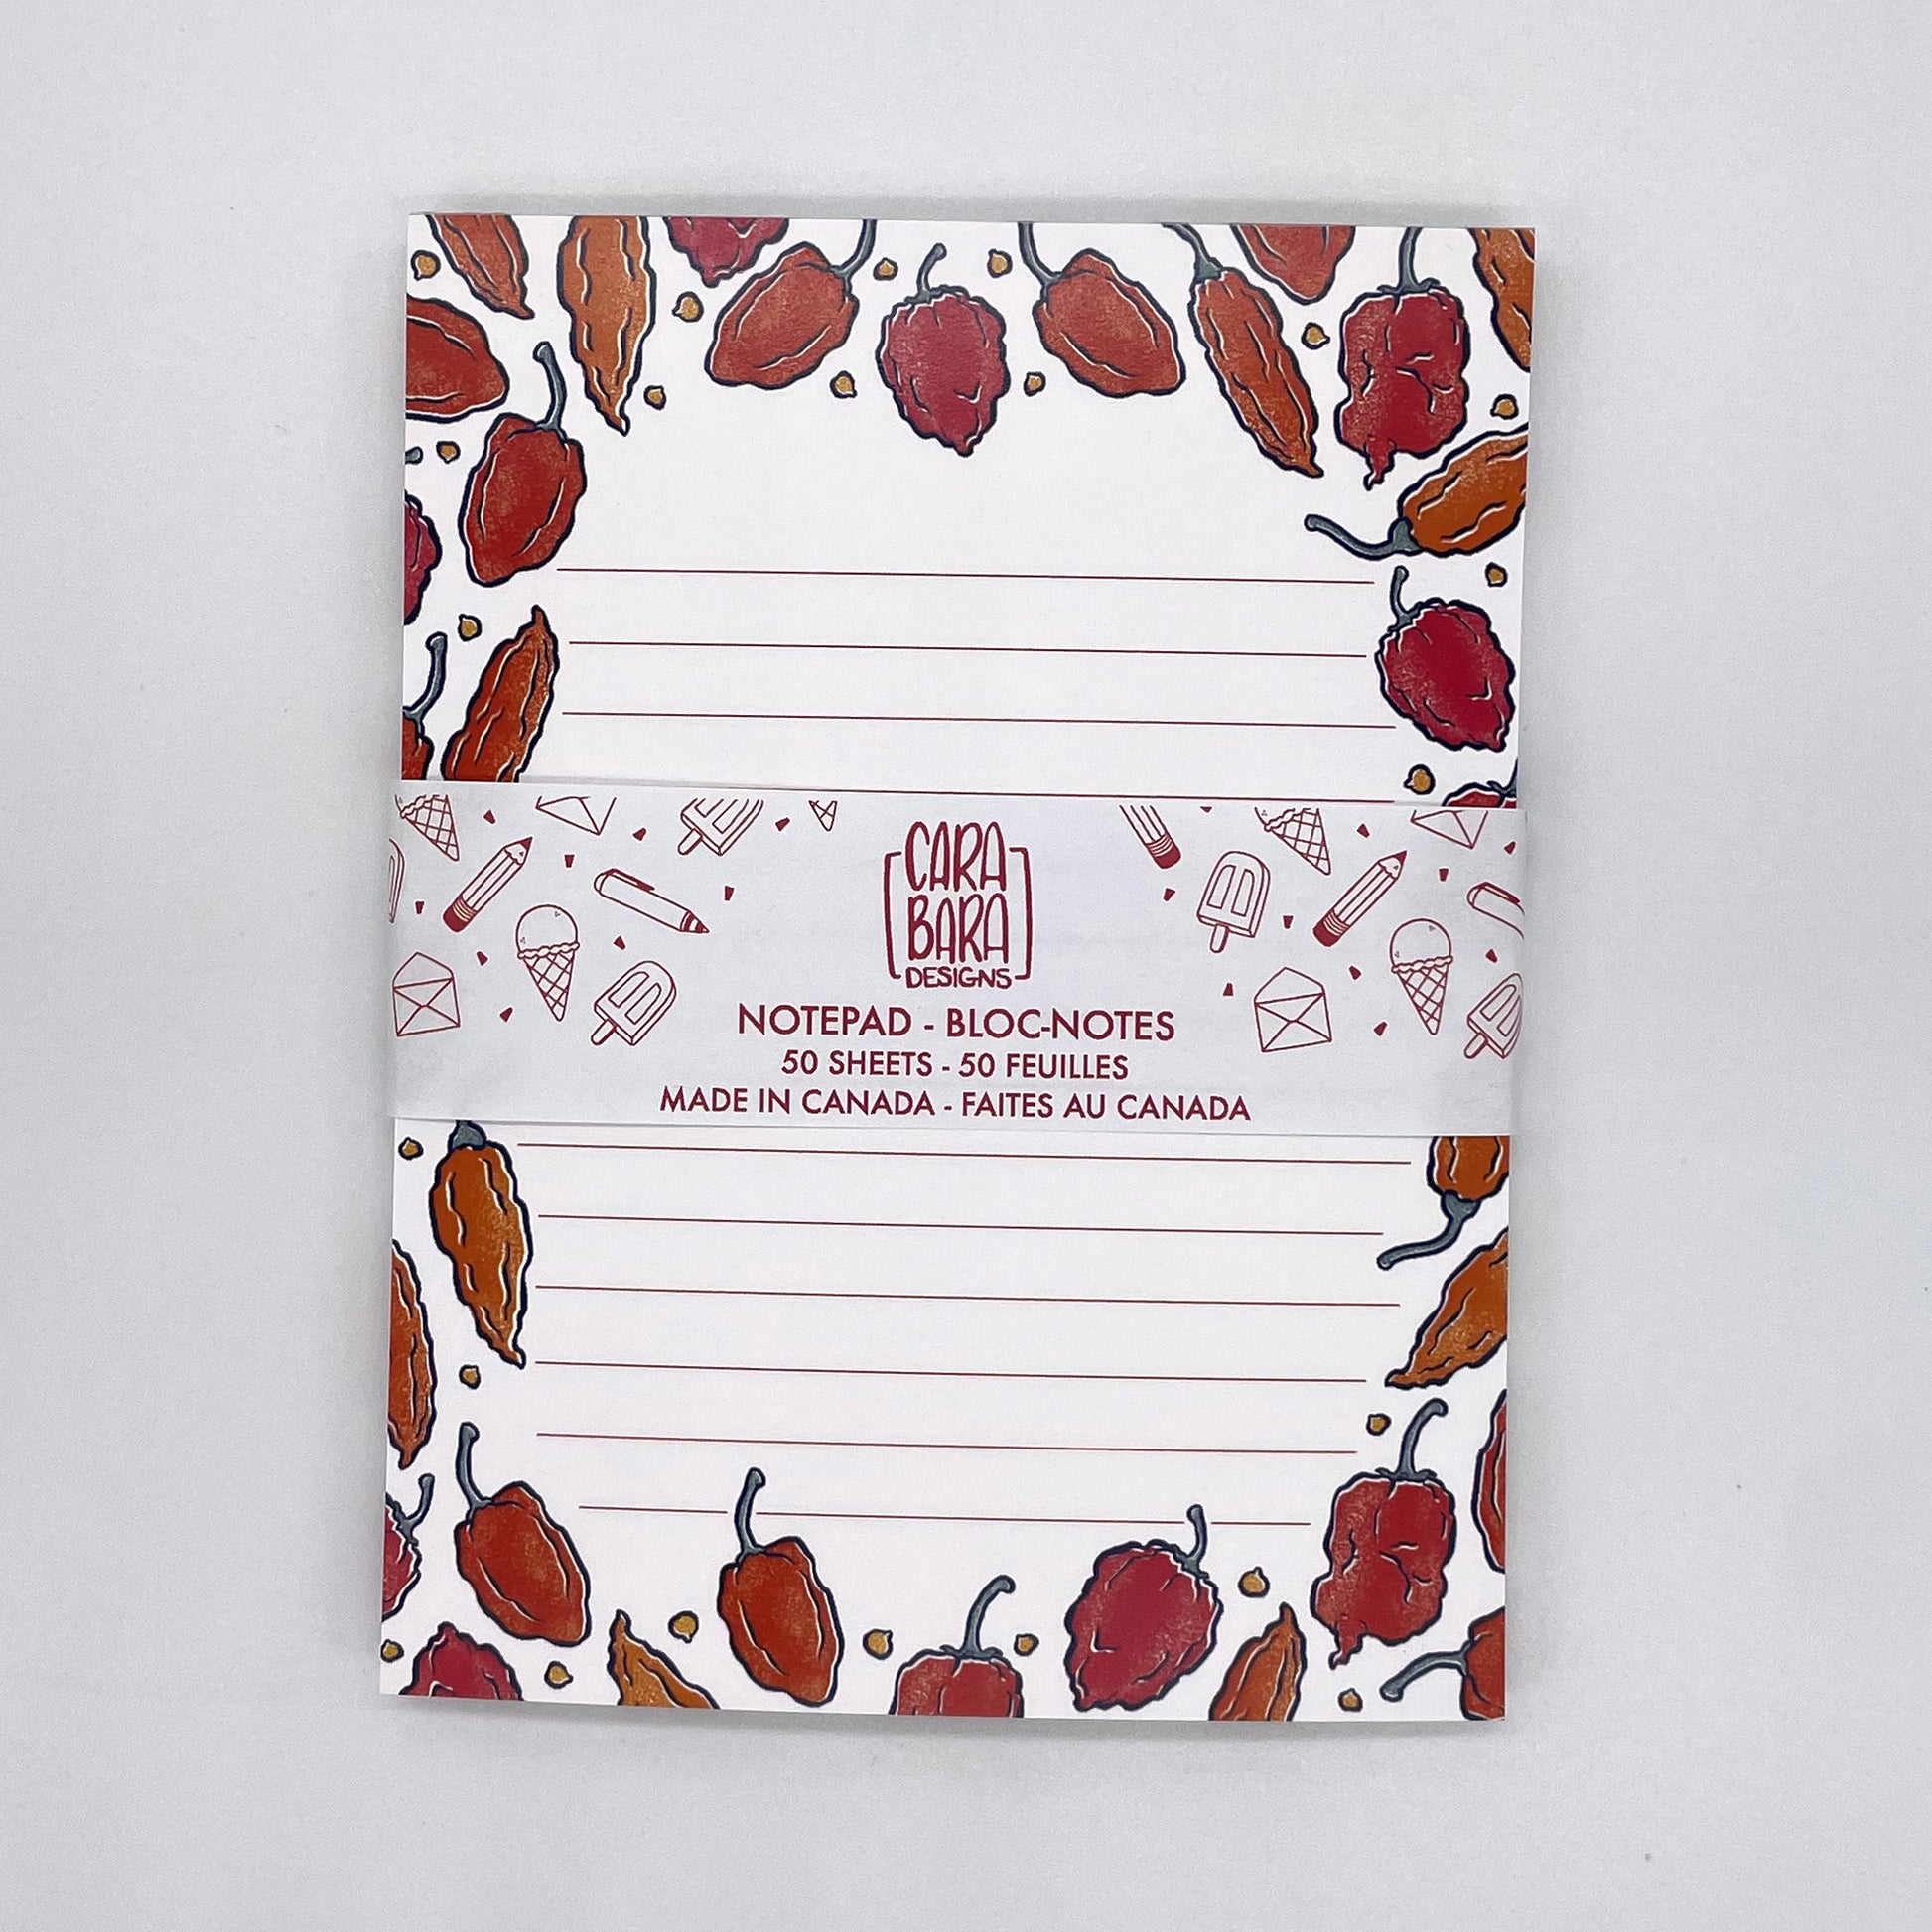 A white lined notepad features illustrations of hot peppers in orange and red. It is packaged in a belly band with the Carabara Designs logo, indicating the notepad is 50 pages and made in Canada.